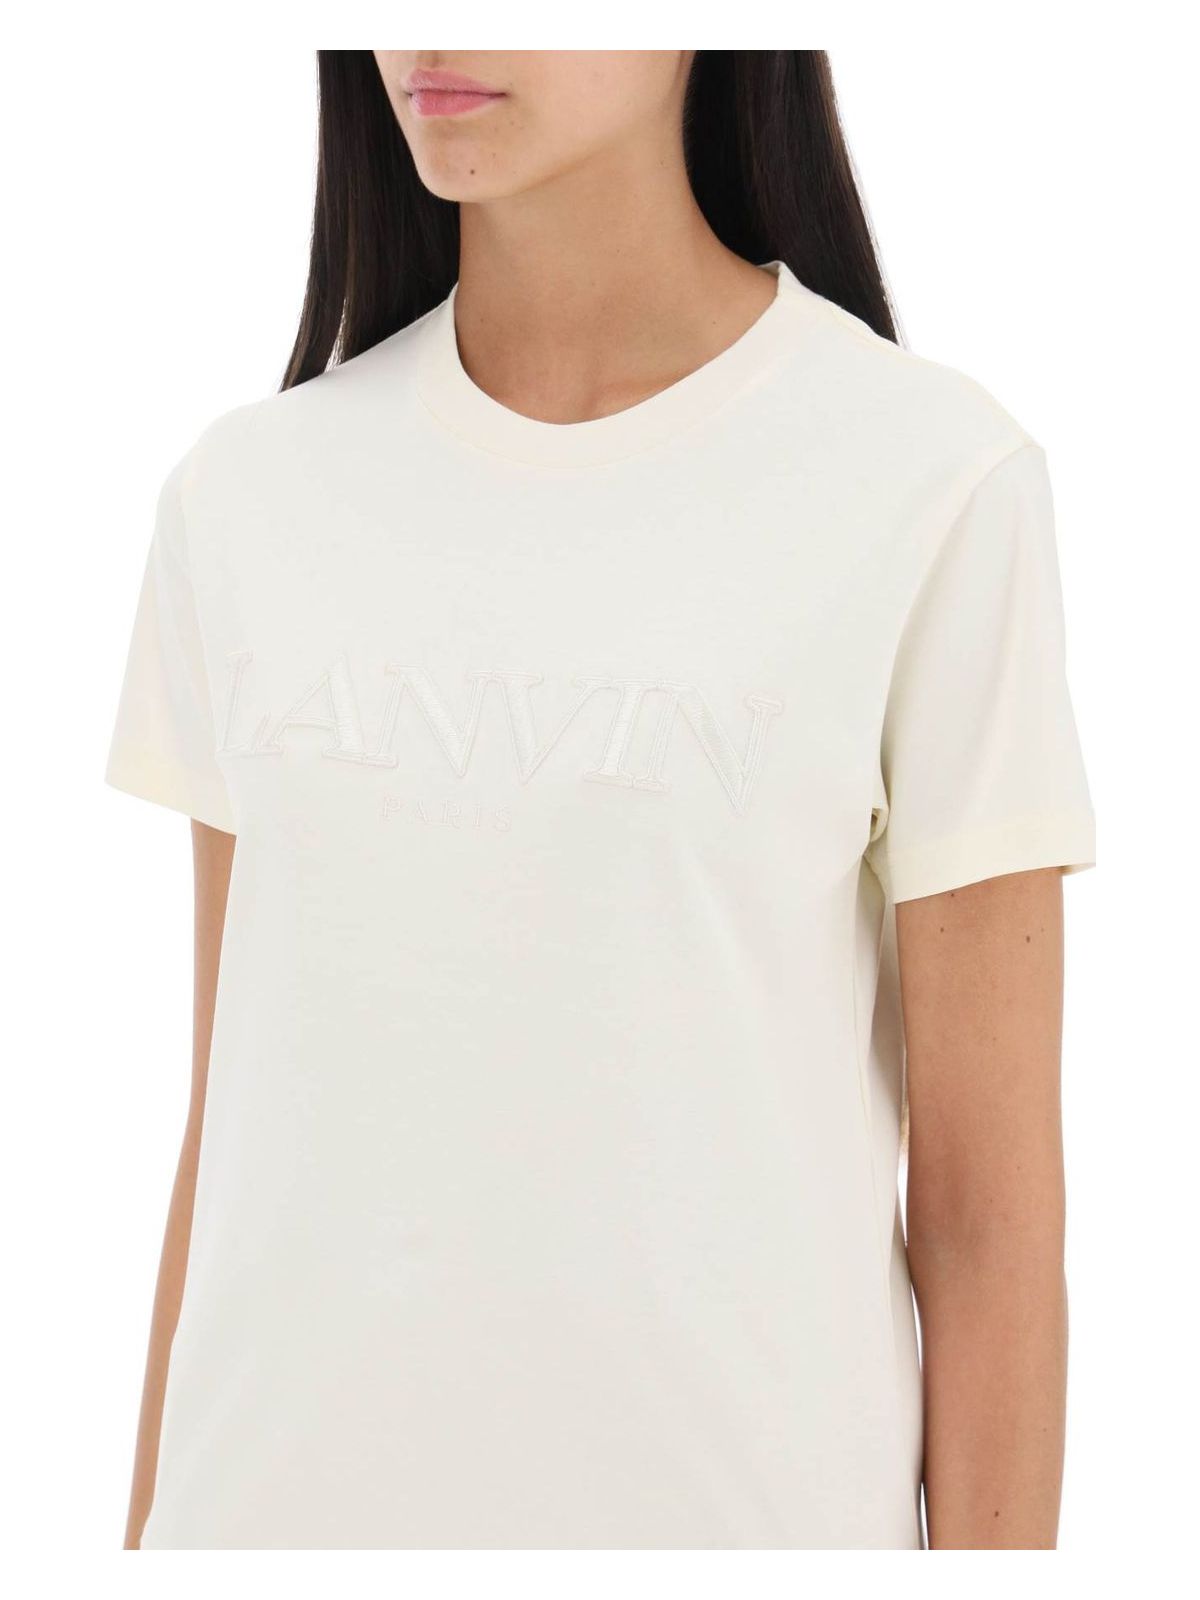 021 LANVIN  LOGO EMBROIDERED T-SHIRT